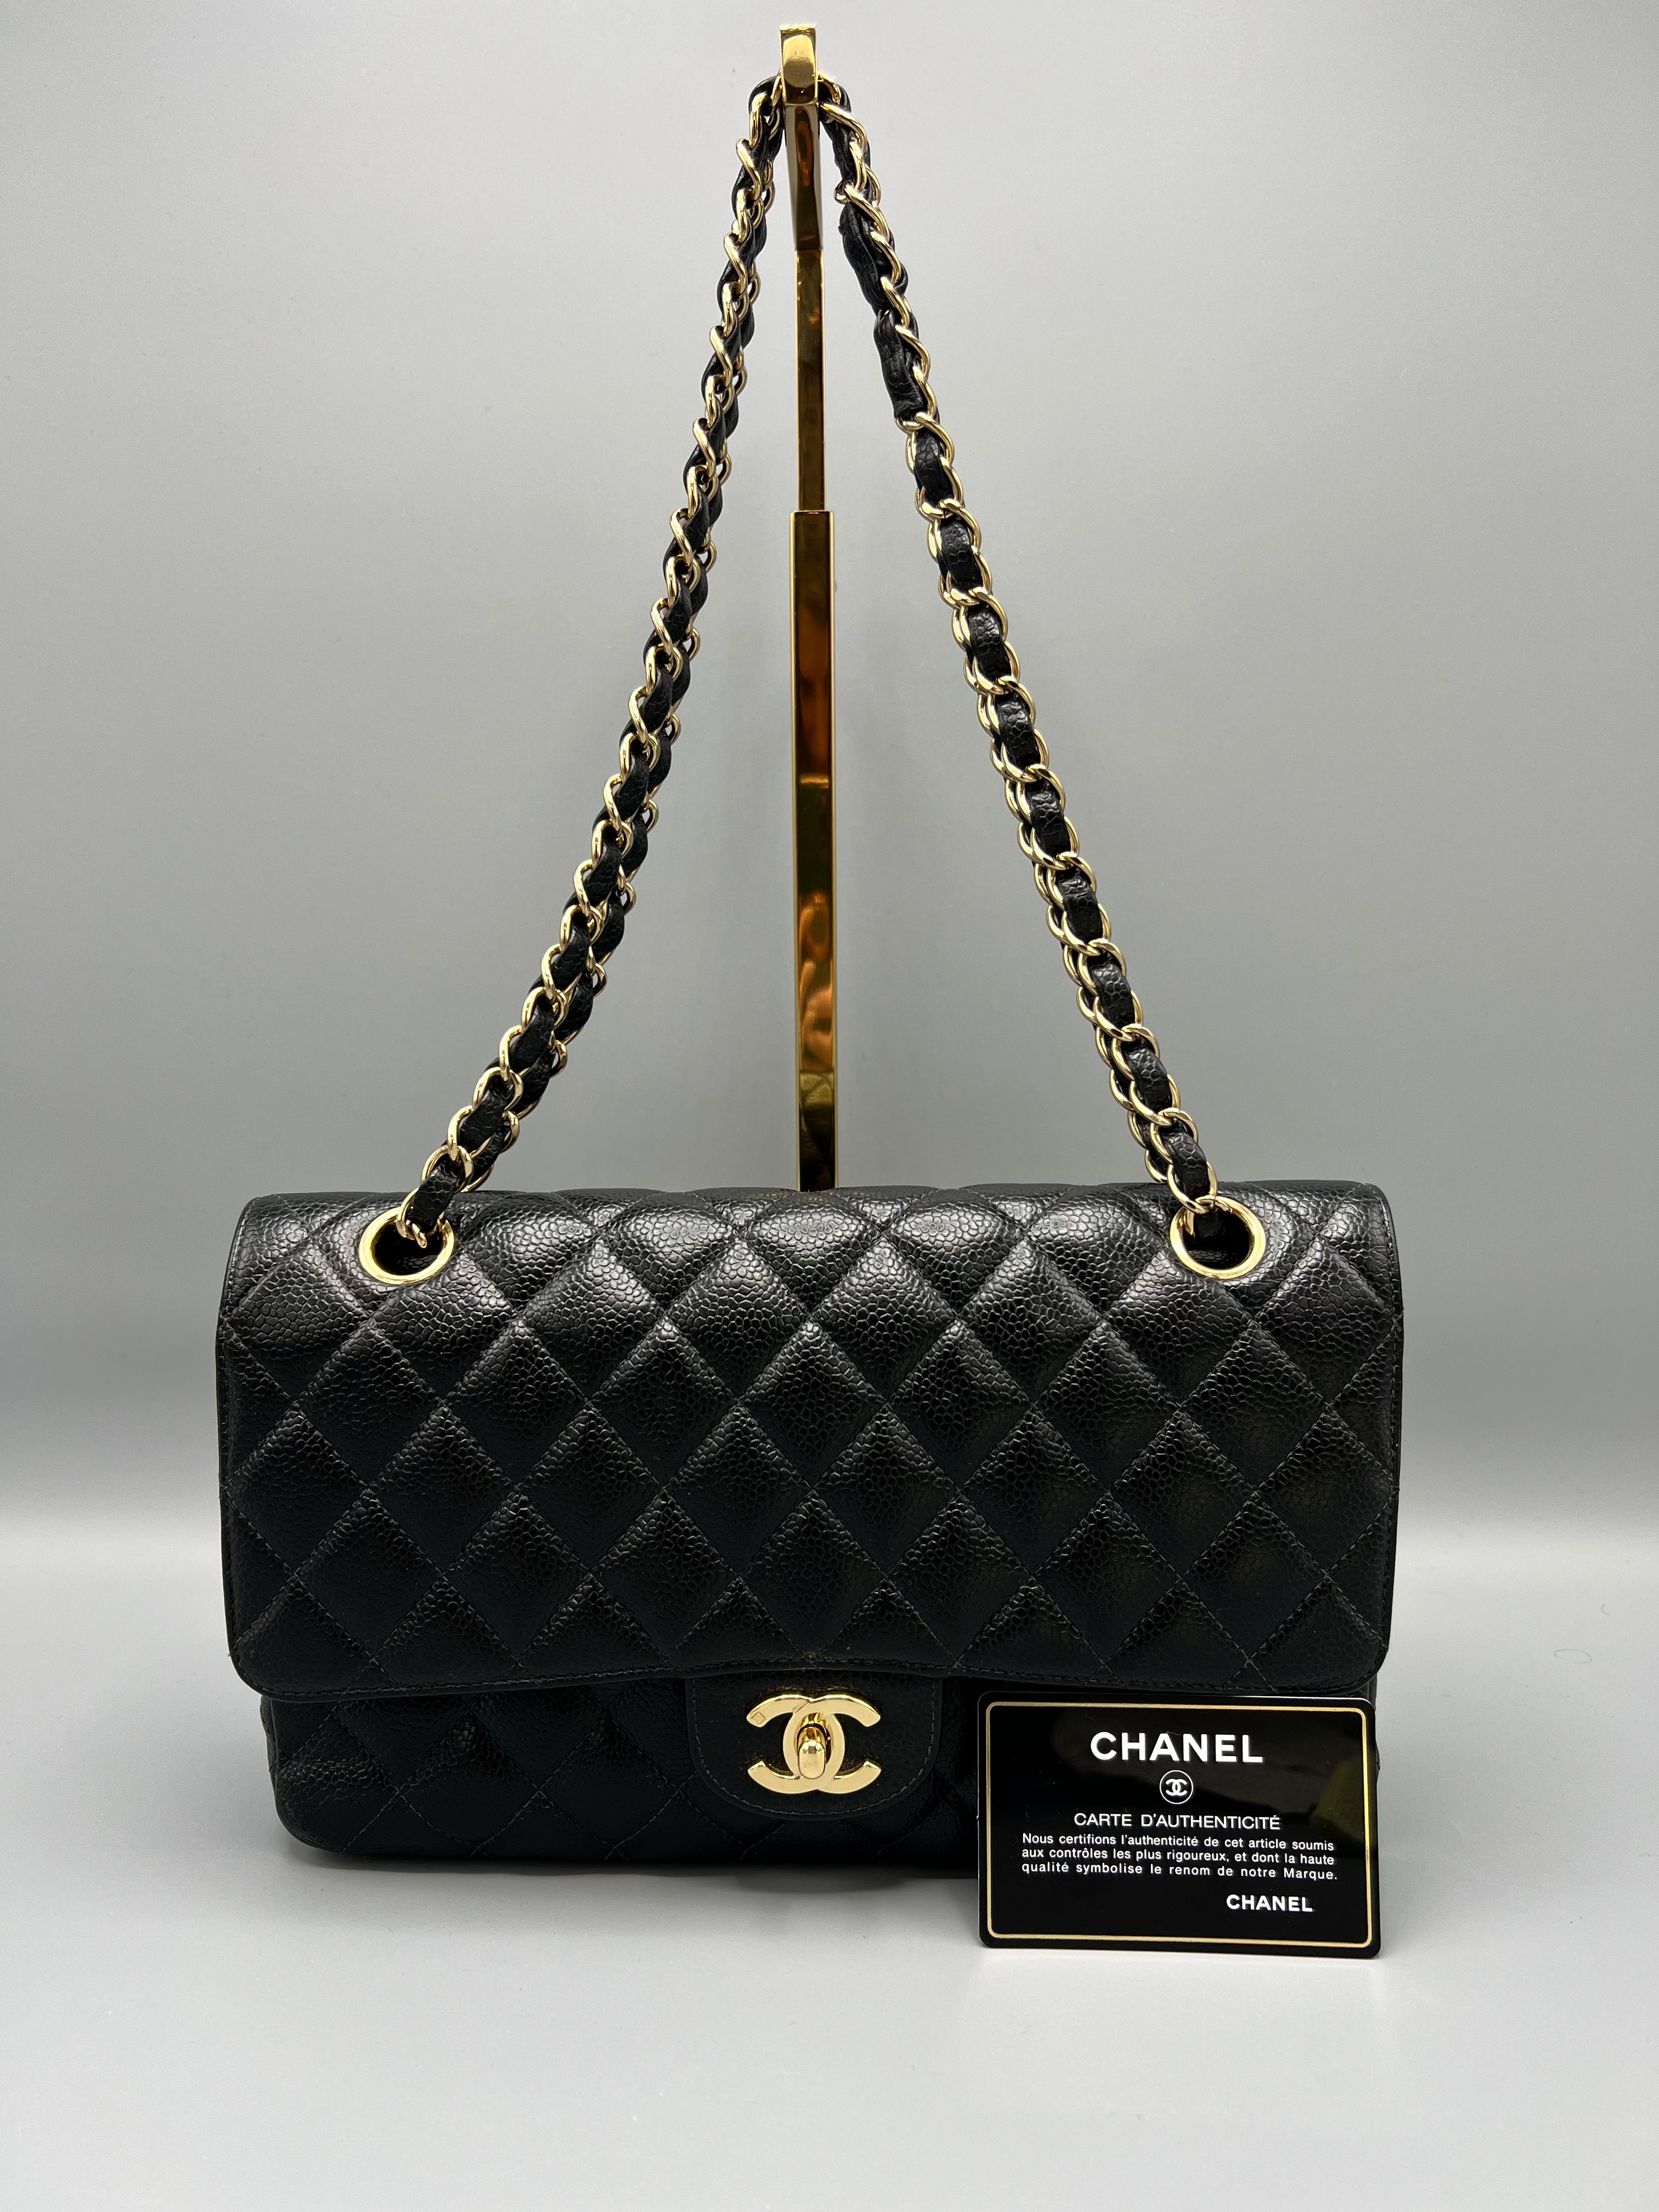 Chanel Medium Classic Double Flap in Black Caviar Leather with Gold Hardware